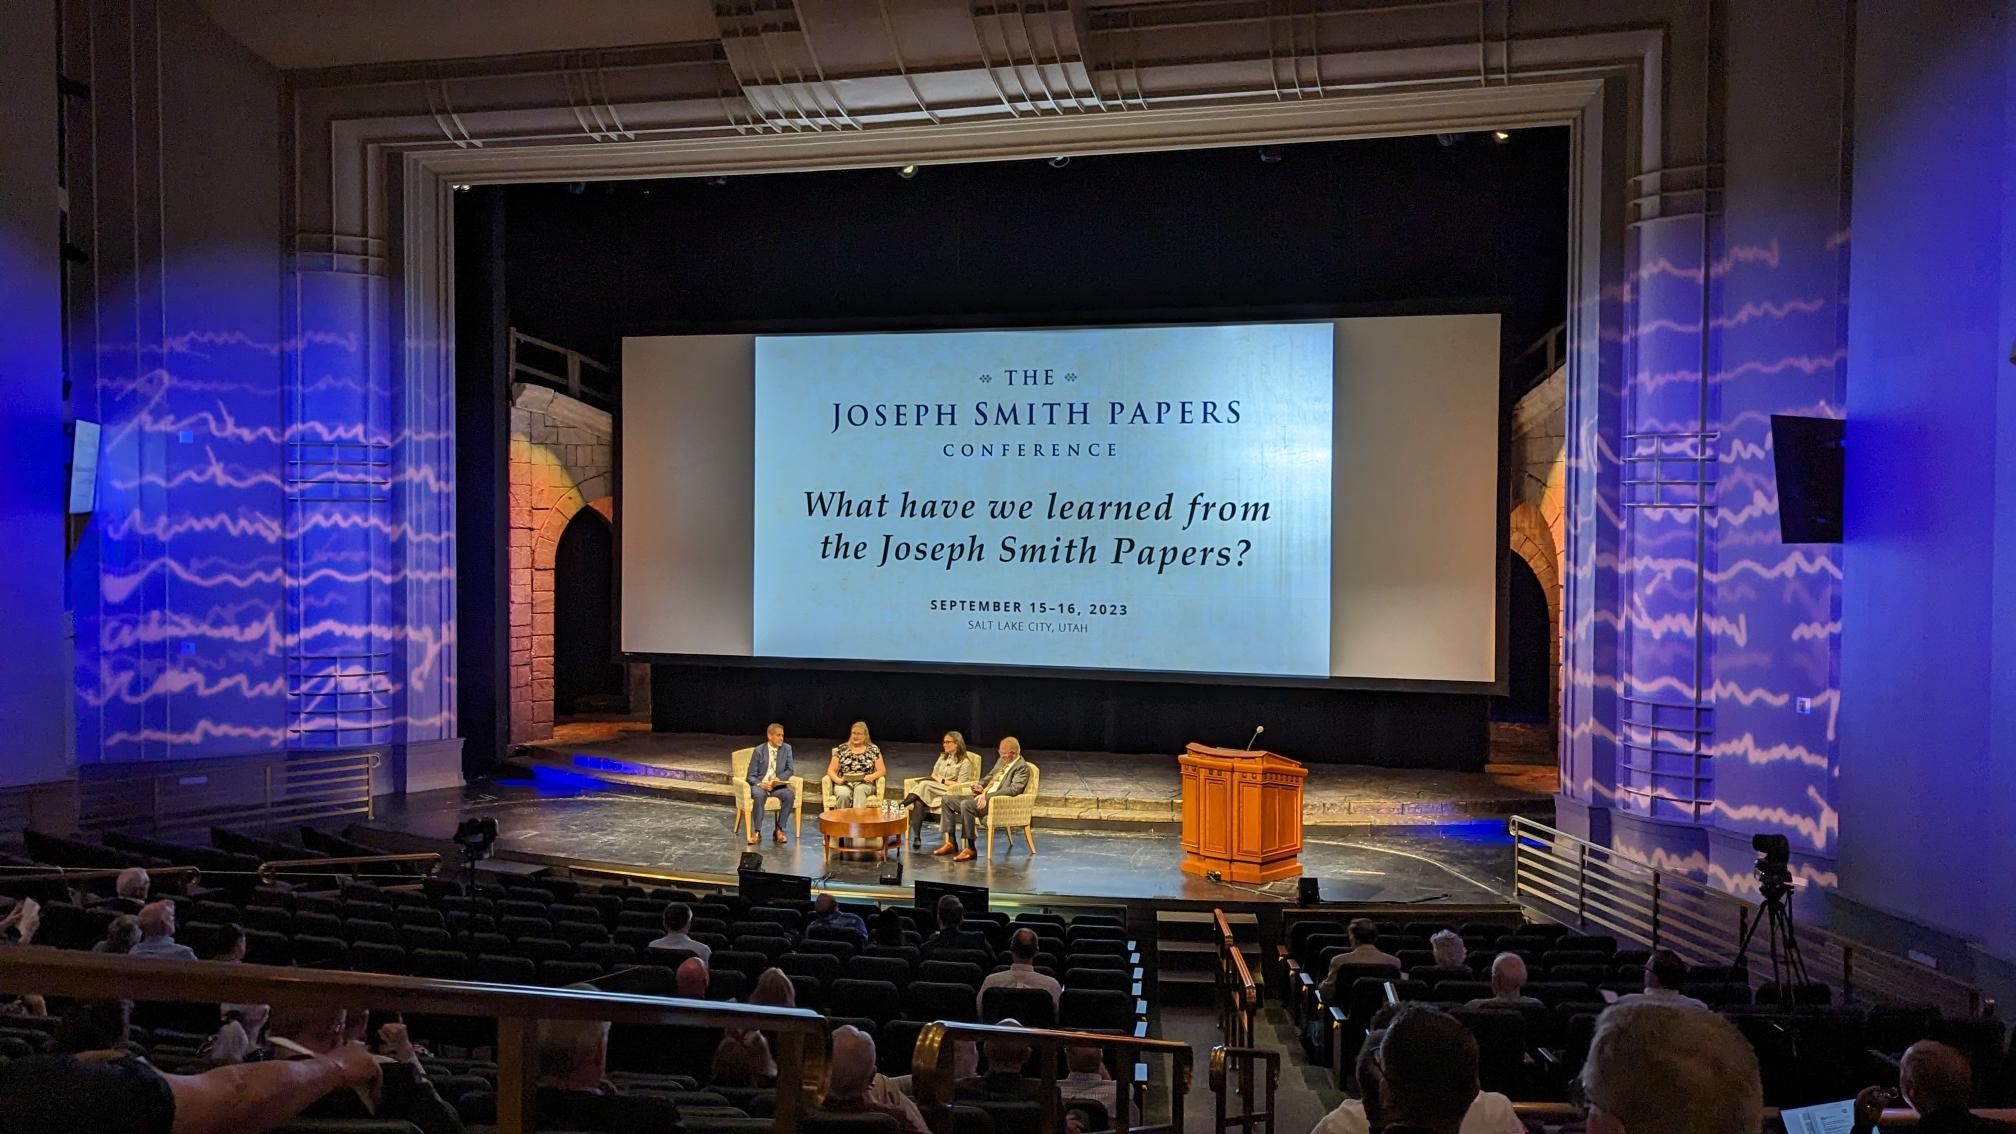 JSP staff onstage at the Joseph Smith Papers conference while audience looks on from their seats